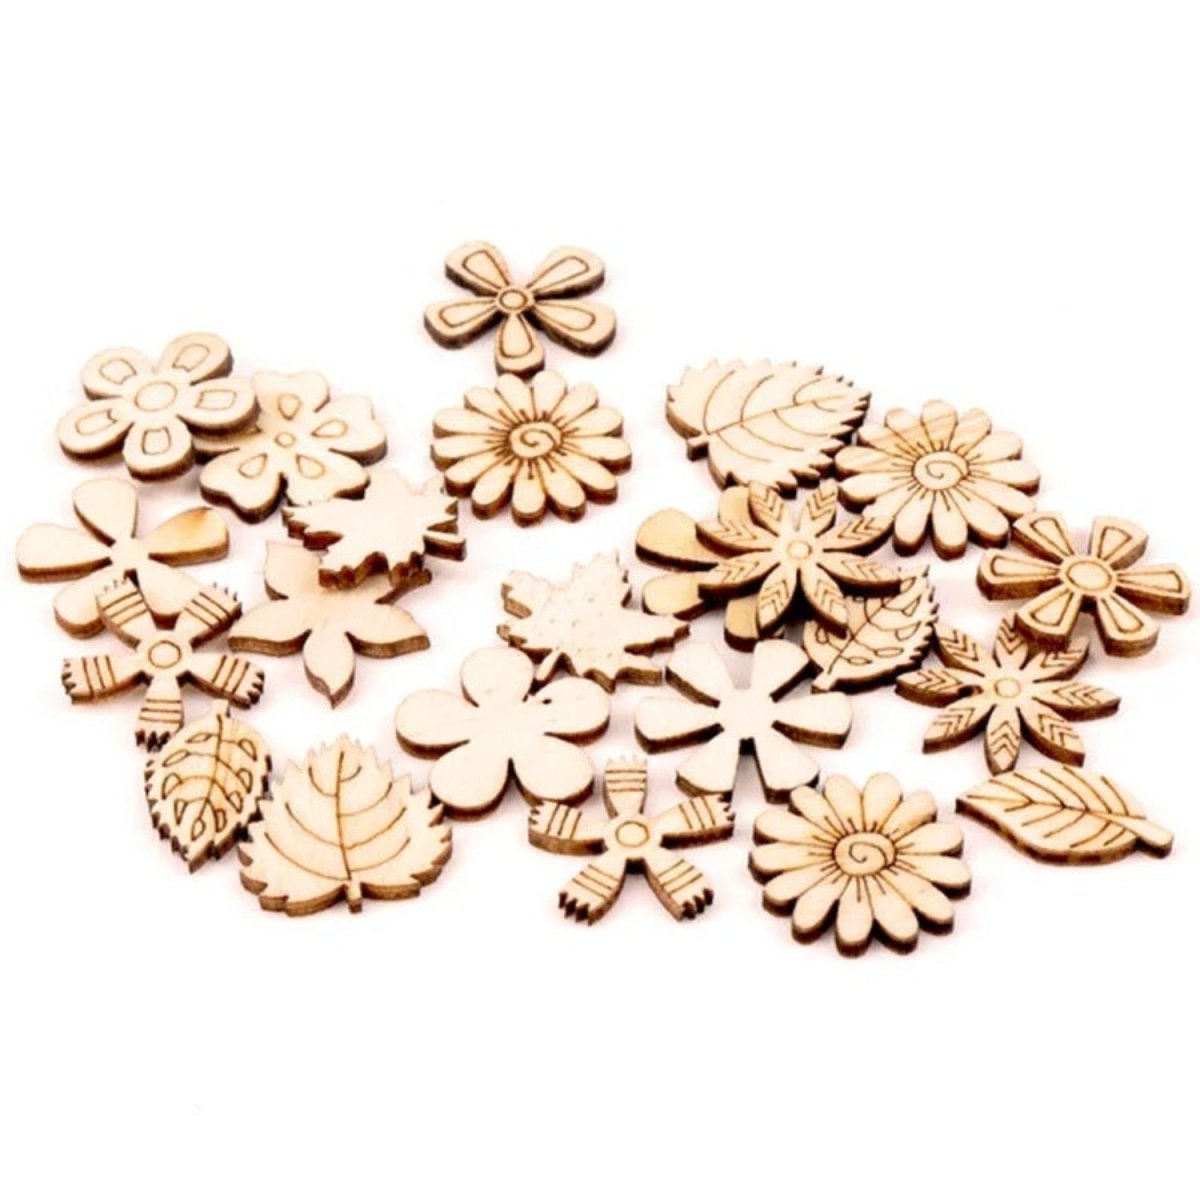 50pcs Flower Leaf Shapes Wooden Forms Scrapbooking Craft DIY 20mm - - Asia Sell